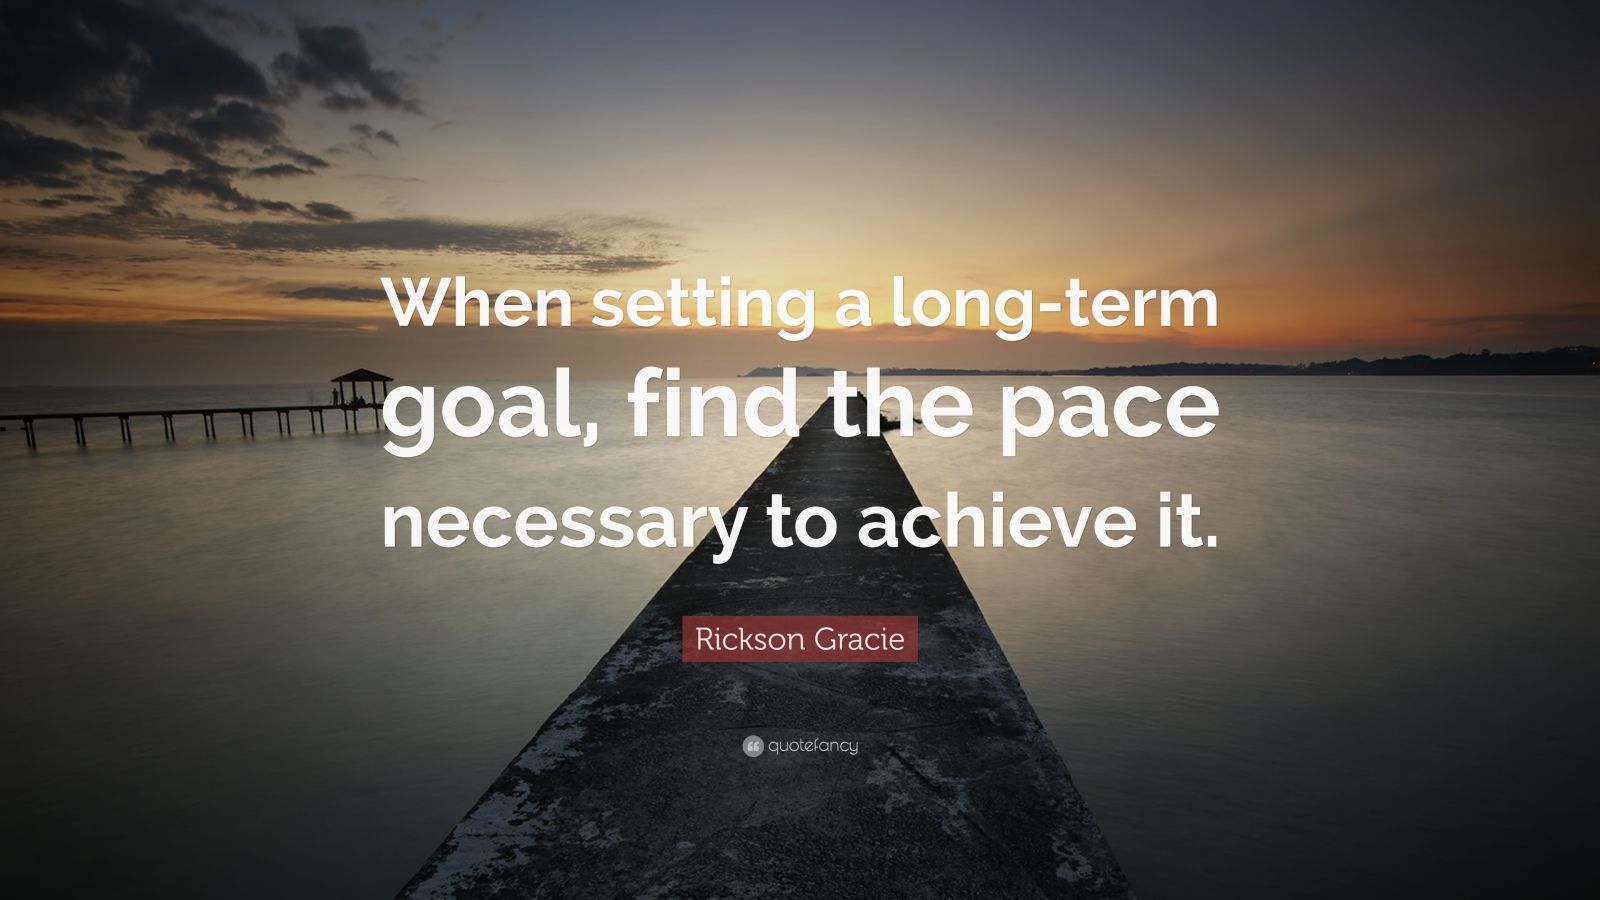 Rickson Gracie Quote: “When setting a long-term goal, find the pace